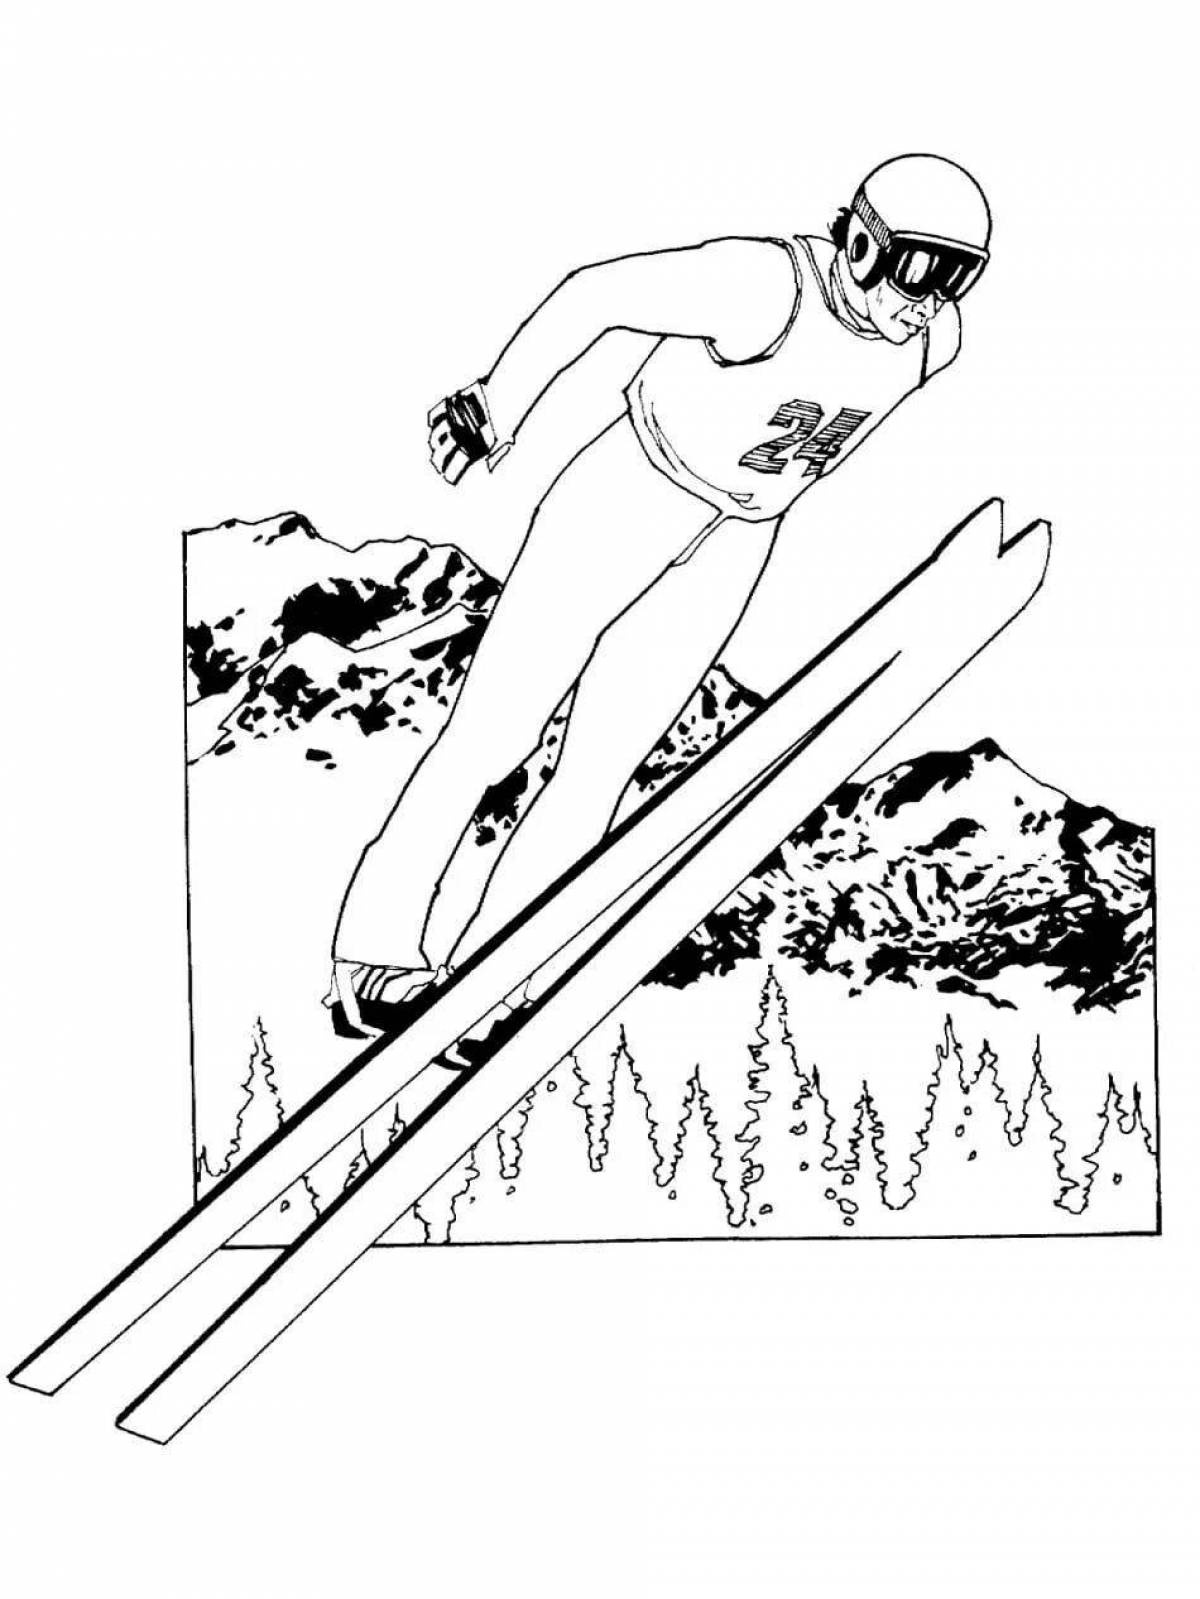 Fun coloring book for children on Olympic sports